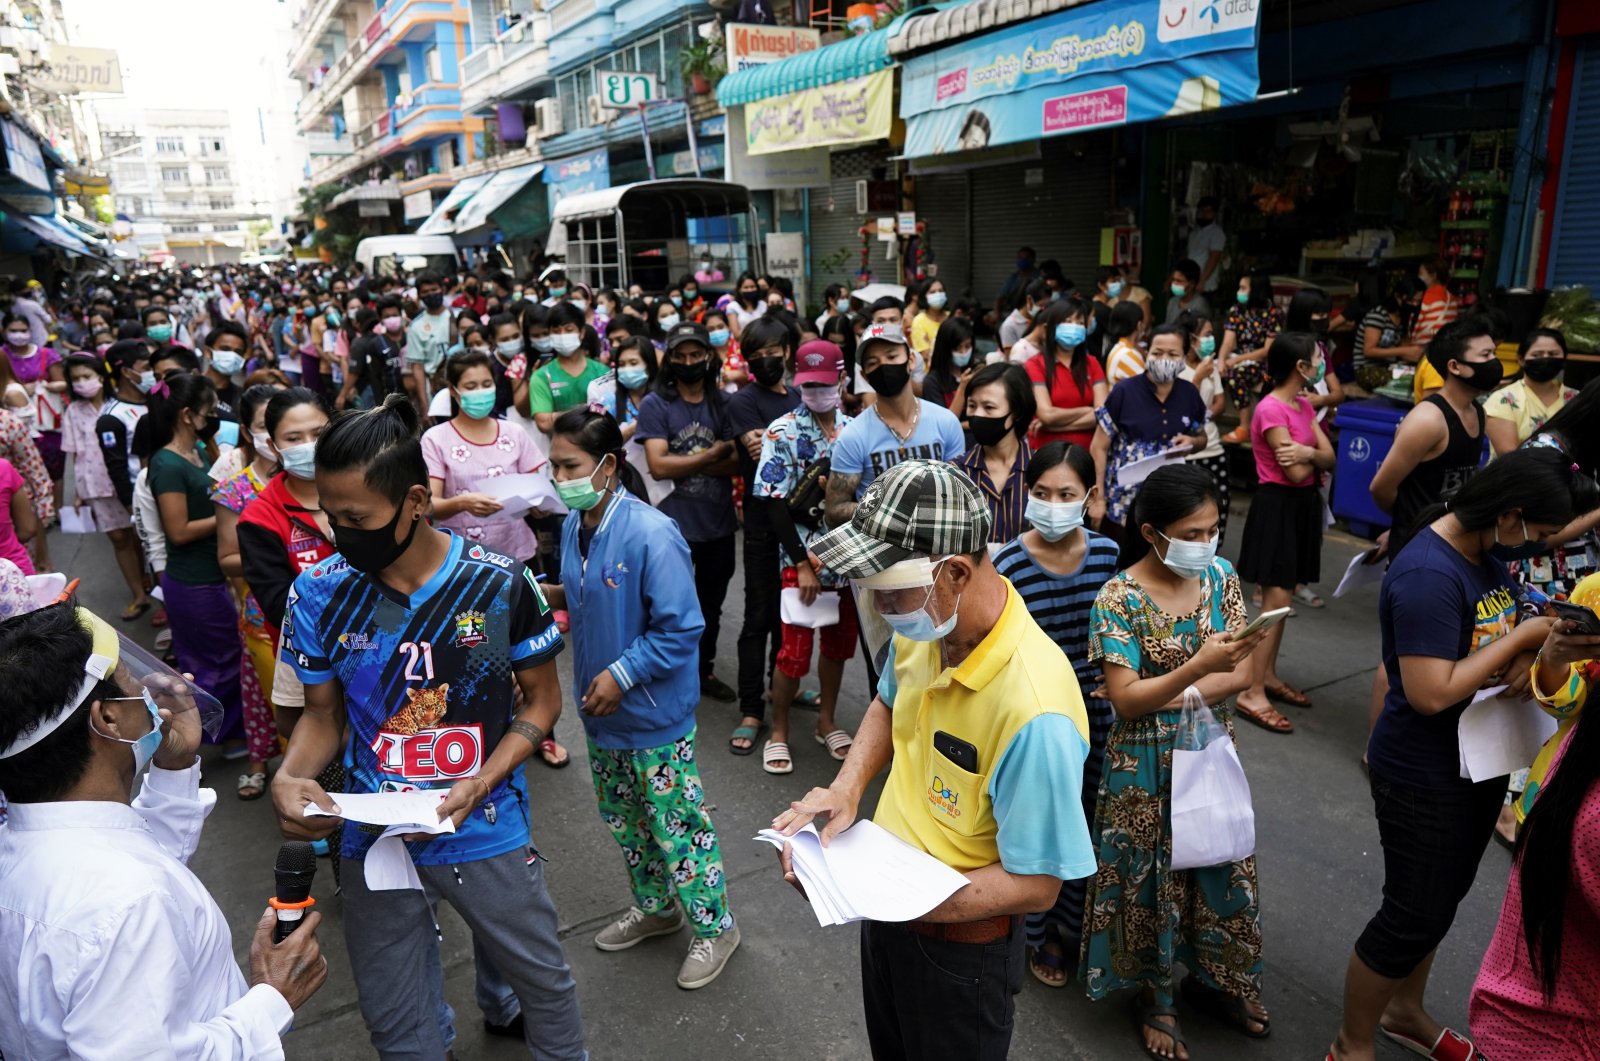 Migrant workers queue for a COVID-19 nasal swab test at a migrant community, amid the coronavirus disease (COVID-19) outbreak, in Samut Sakhon province, Thailand, Dec. 20, 2020. (Reuters Photo)